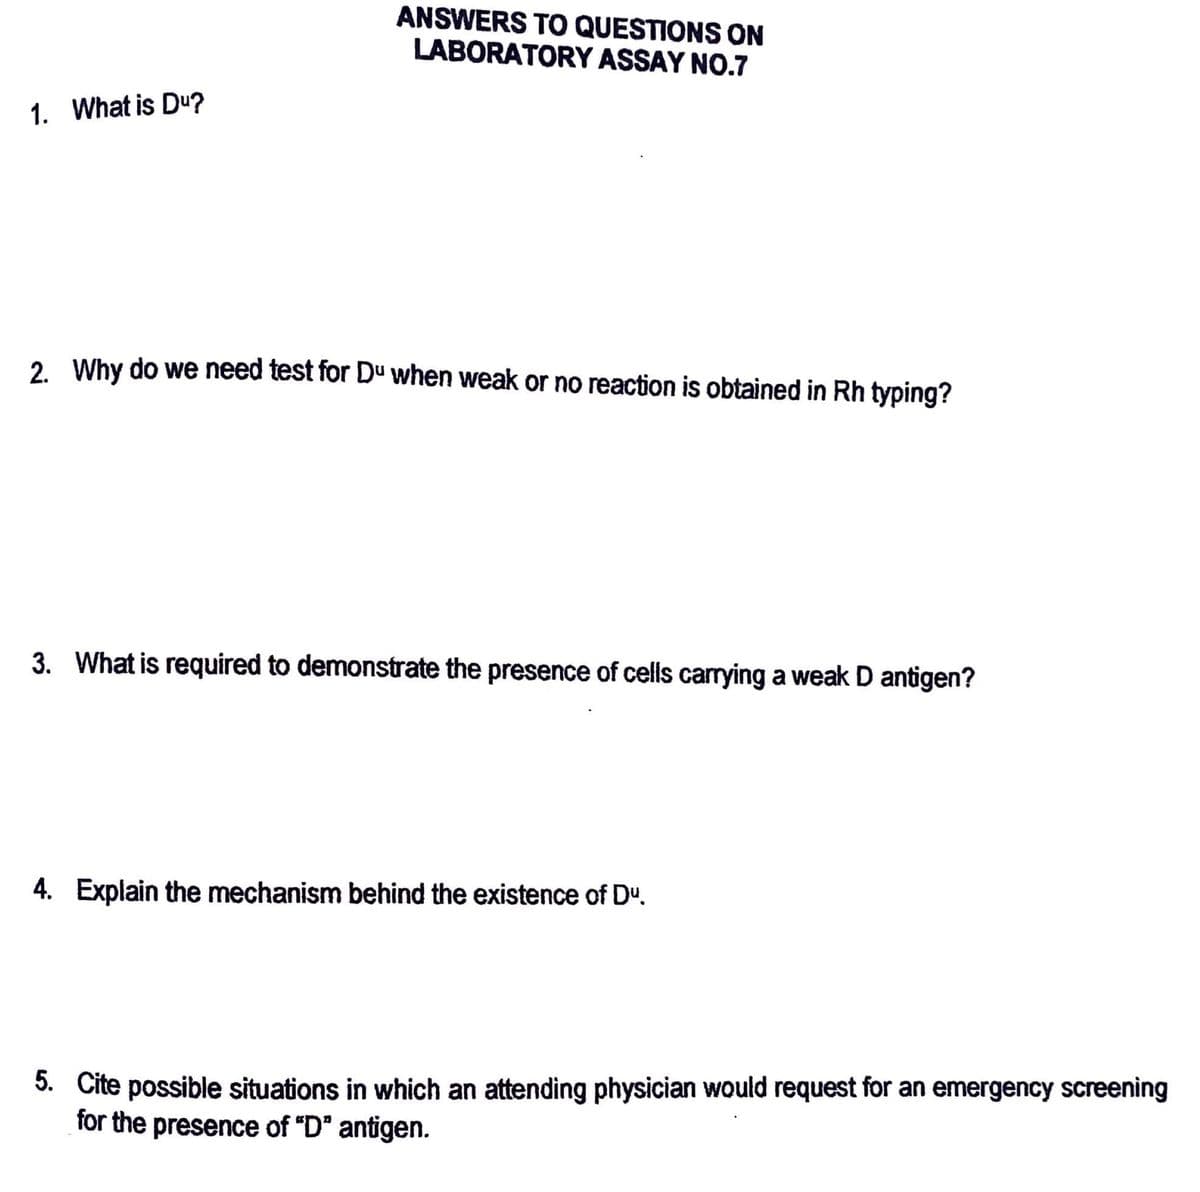 1. What is Du?
ANSWERS TO QUESTIONS ON
LABORATORY ASSAY NO.7
2. Why do we need test for Du when weak or no reaction is obtained in Rh typing?
3. What is required to demonstrate the presence of cells carrying a weak D antigen?
4. Explain the mechanism behind the existence of Dº.
5. Cite possible situations in which an attending physician would request for an emergency screening
for the presence of "D" antigen.